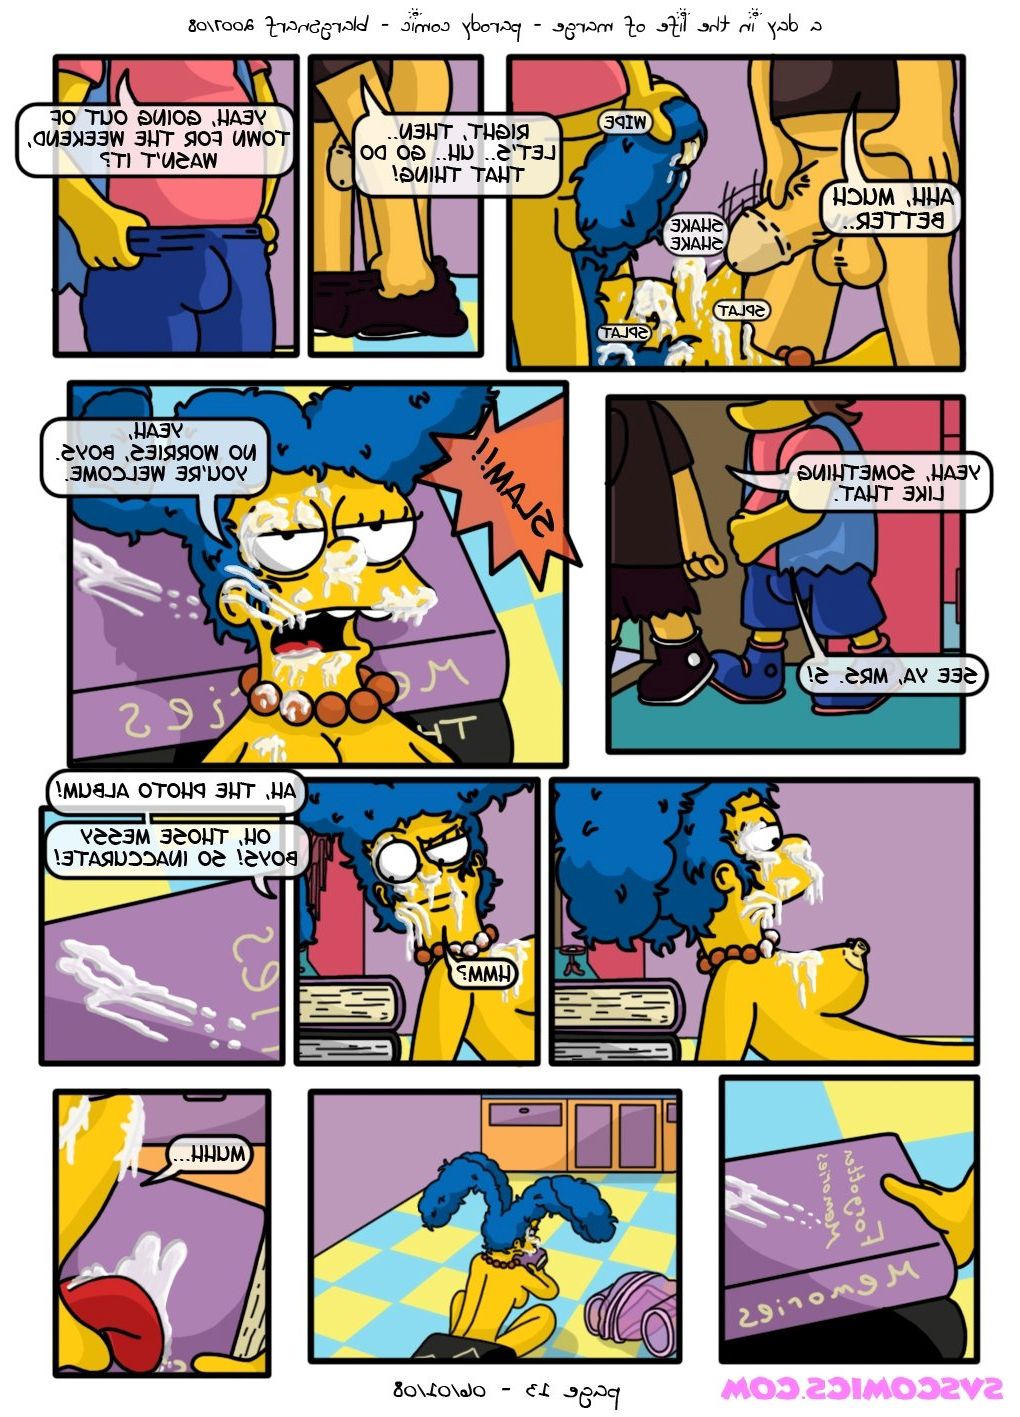 day-life-marge-simpsons image_9568.jpg